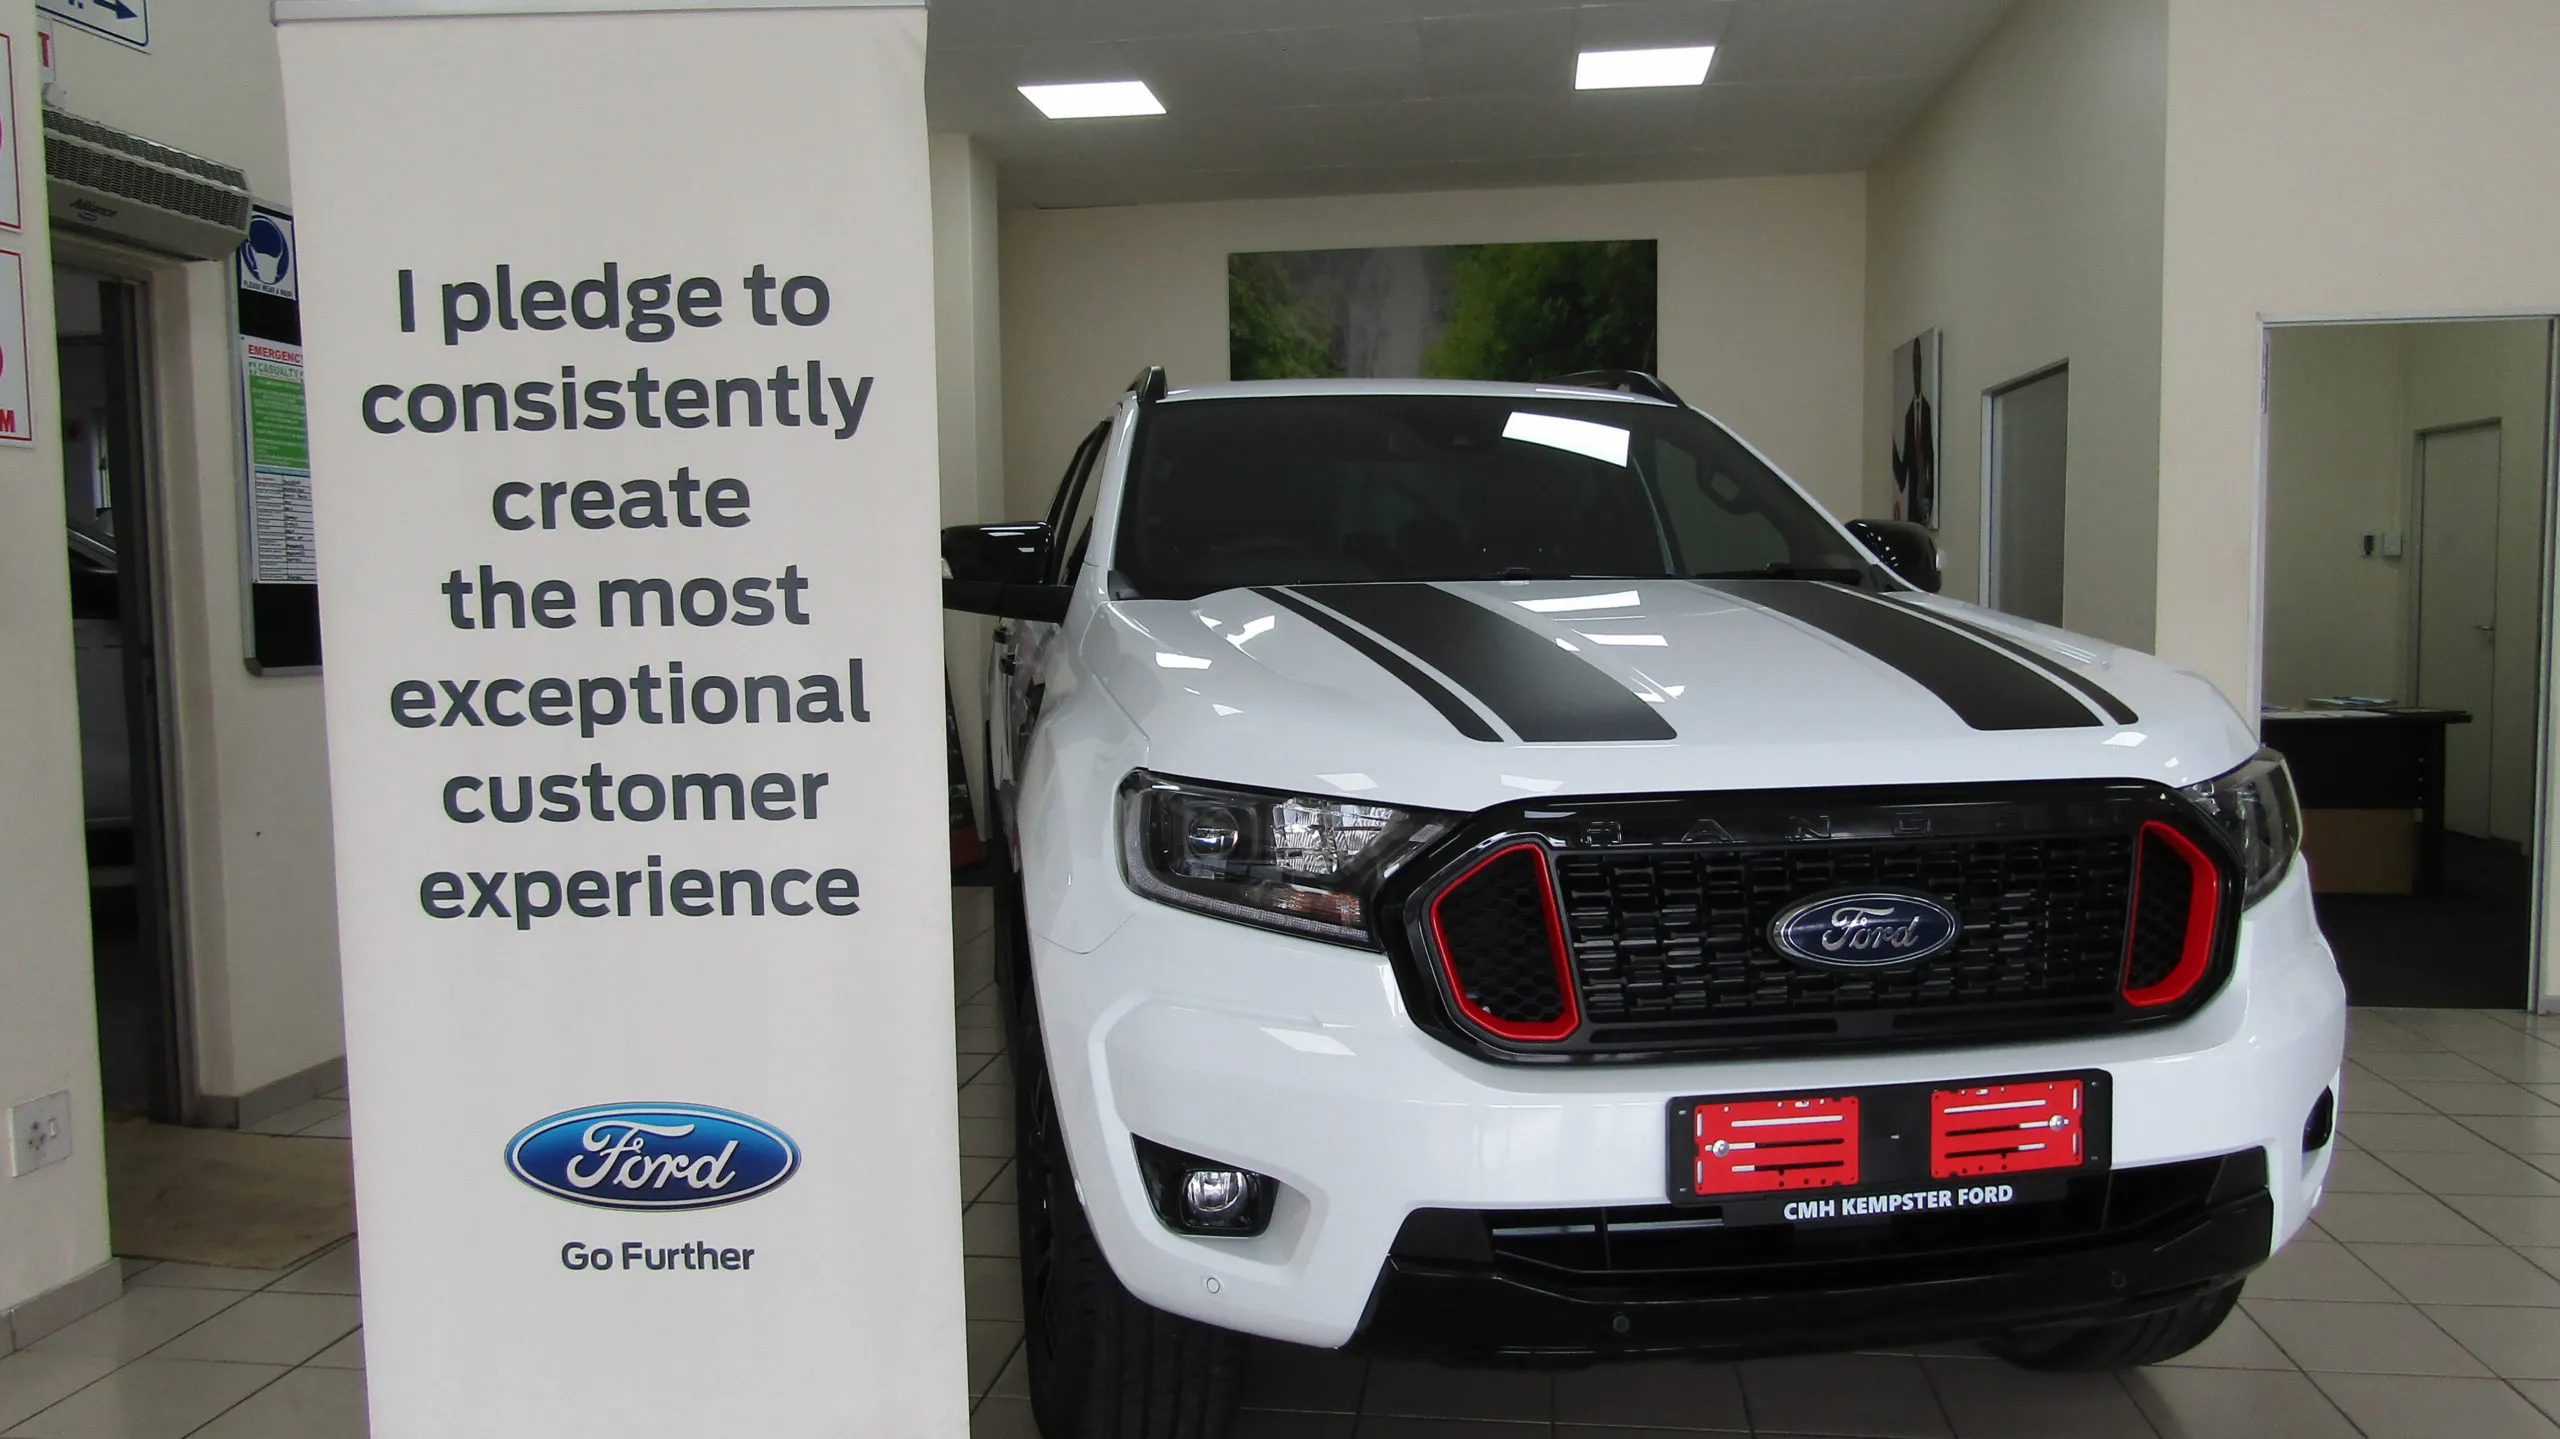 Ford Guest Experience Durban South Showroom